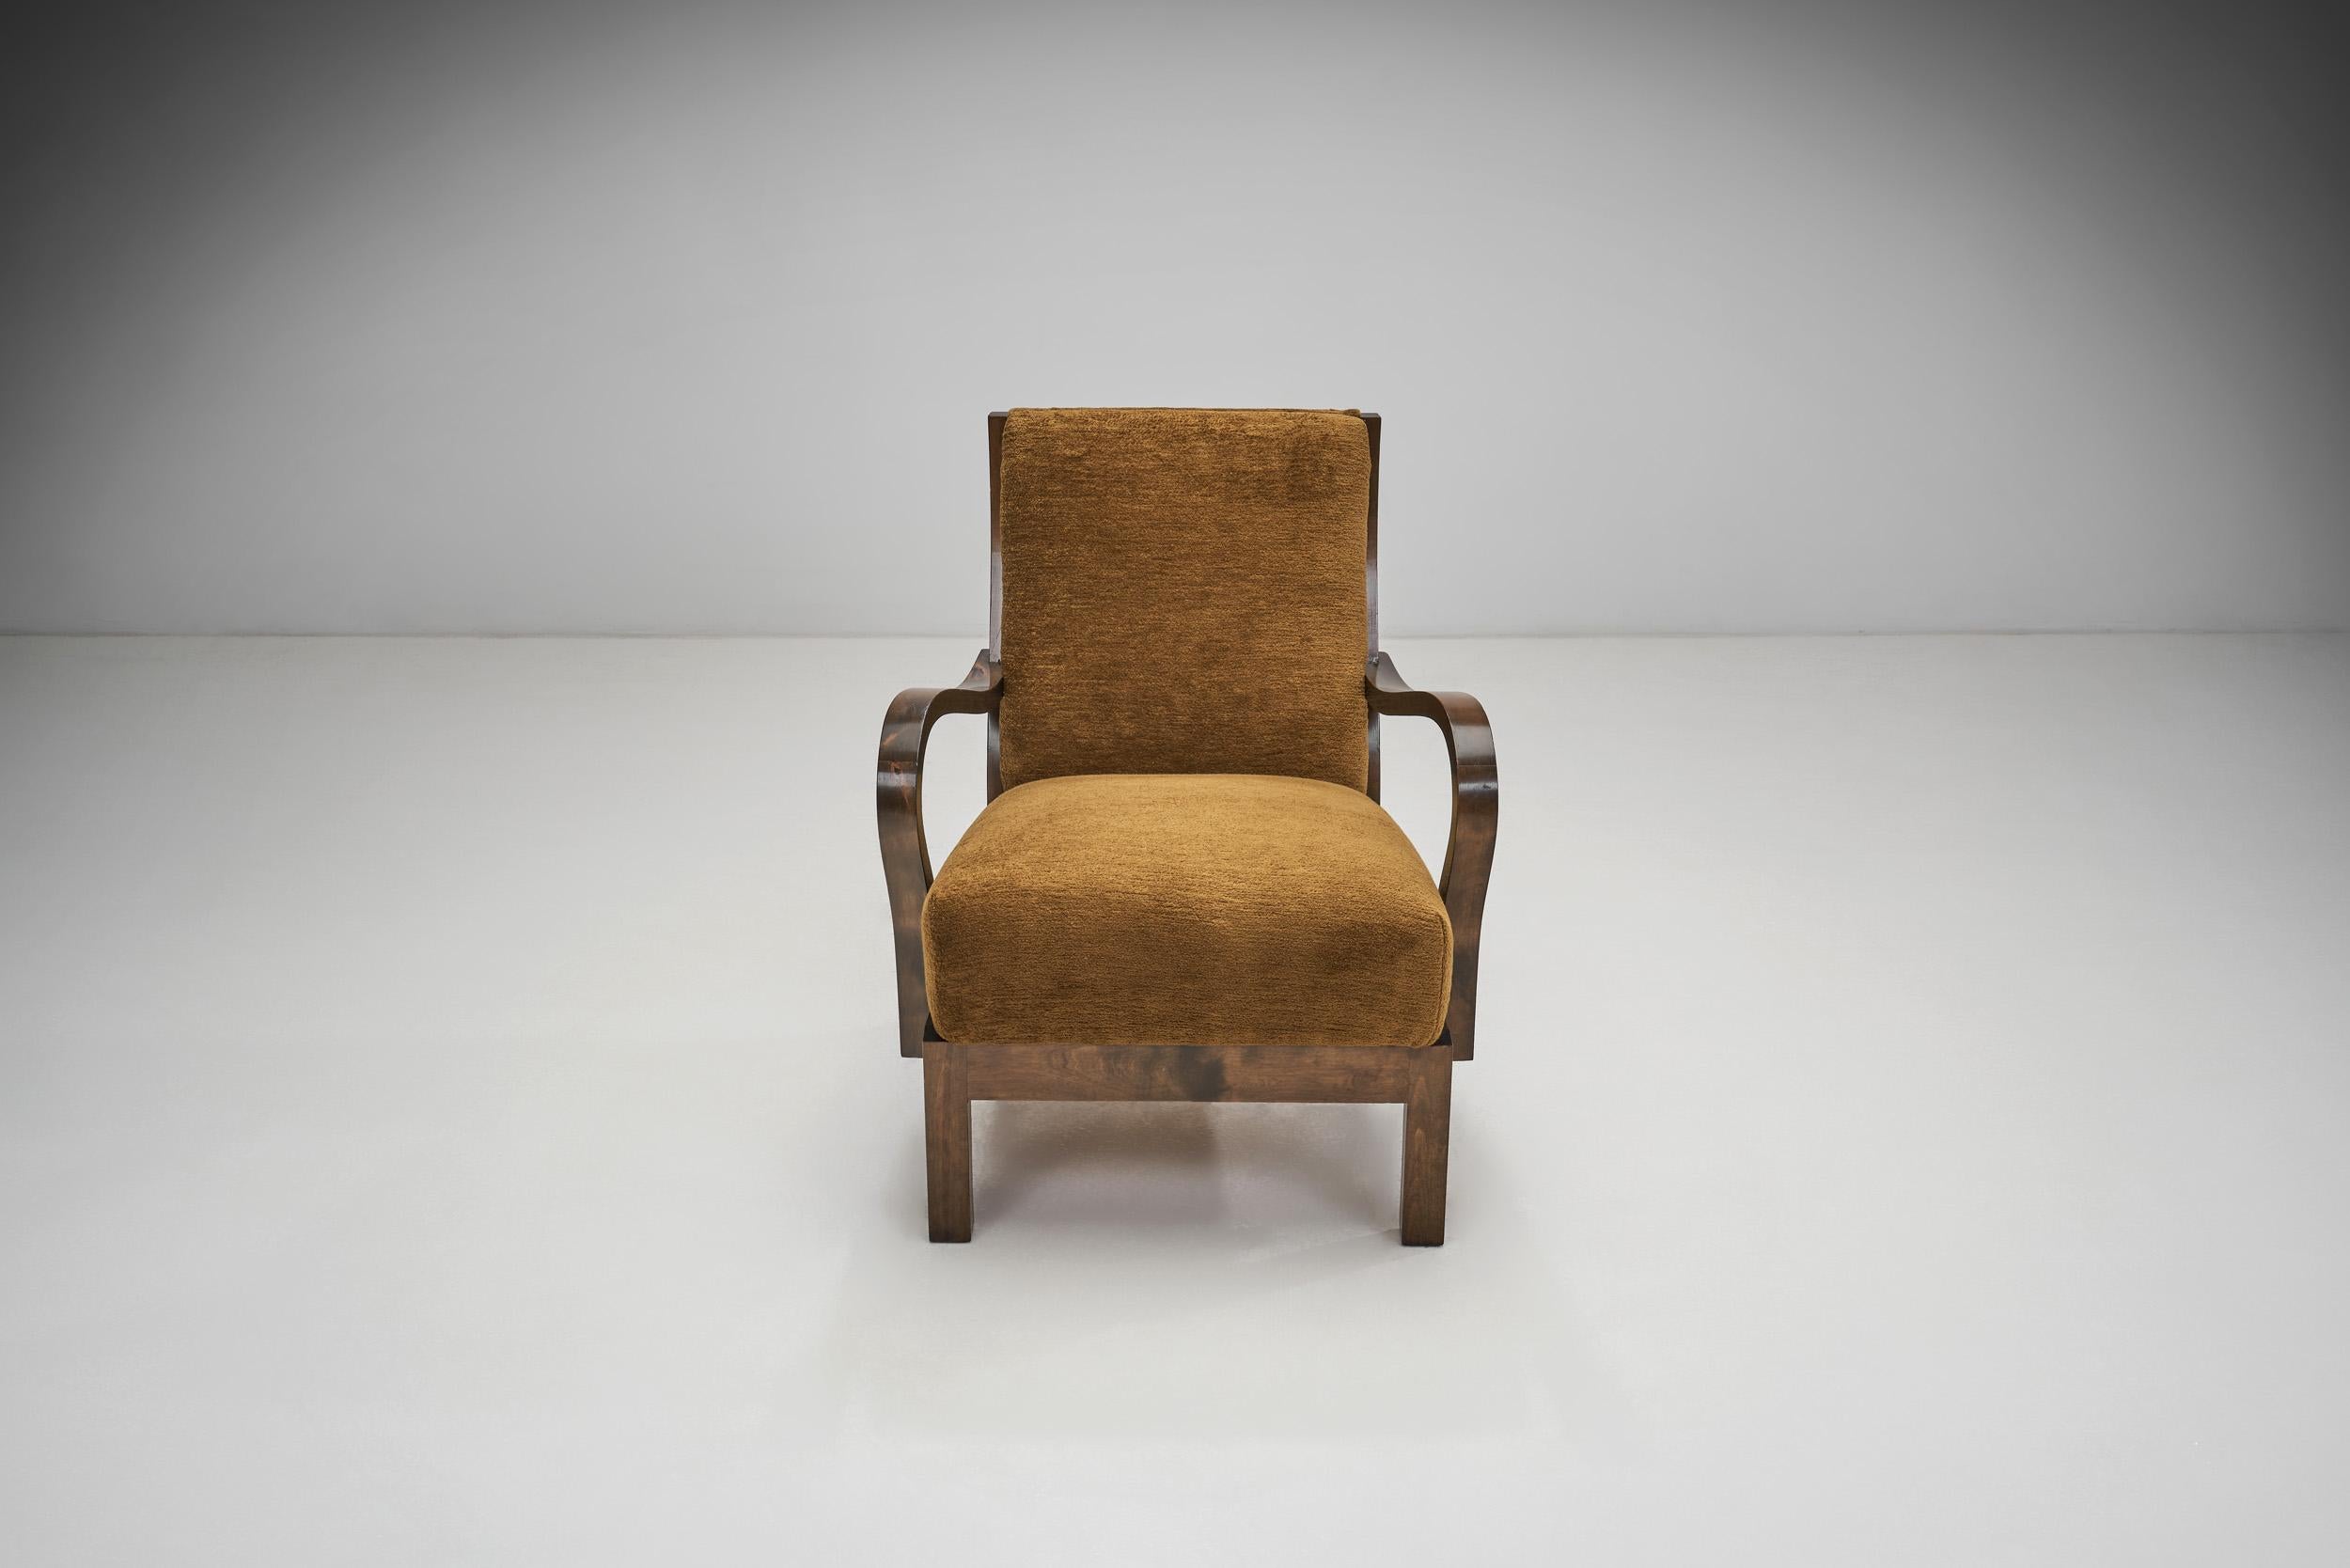 Fabric European Cabinetmaker Armchairs with Curved Arms, Europe, 1930s